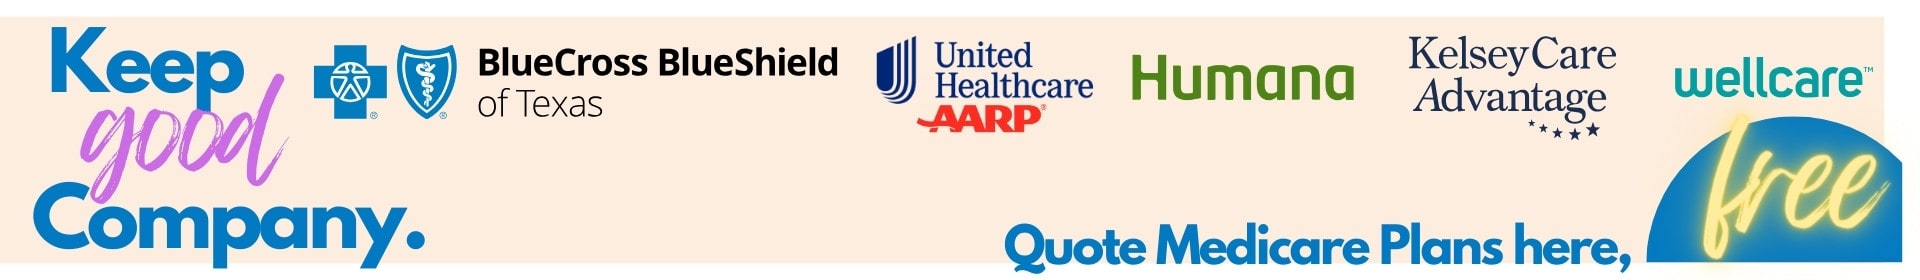 Compare top Medicare carriers in Texas - Free quotes for Advantage and Medigap plans.